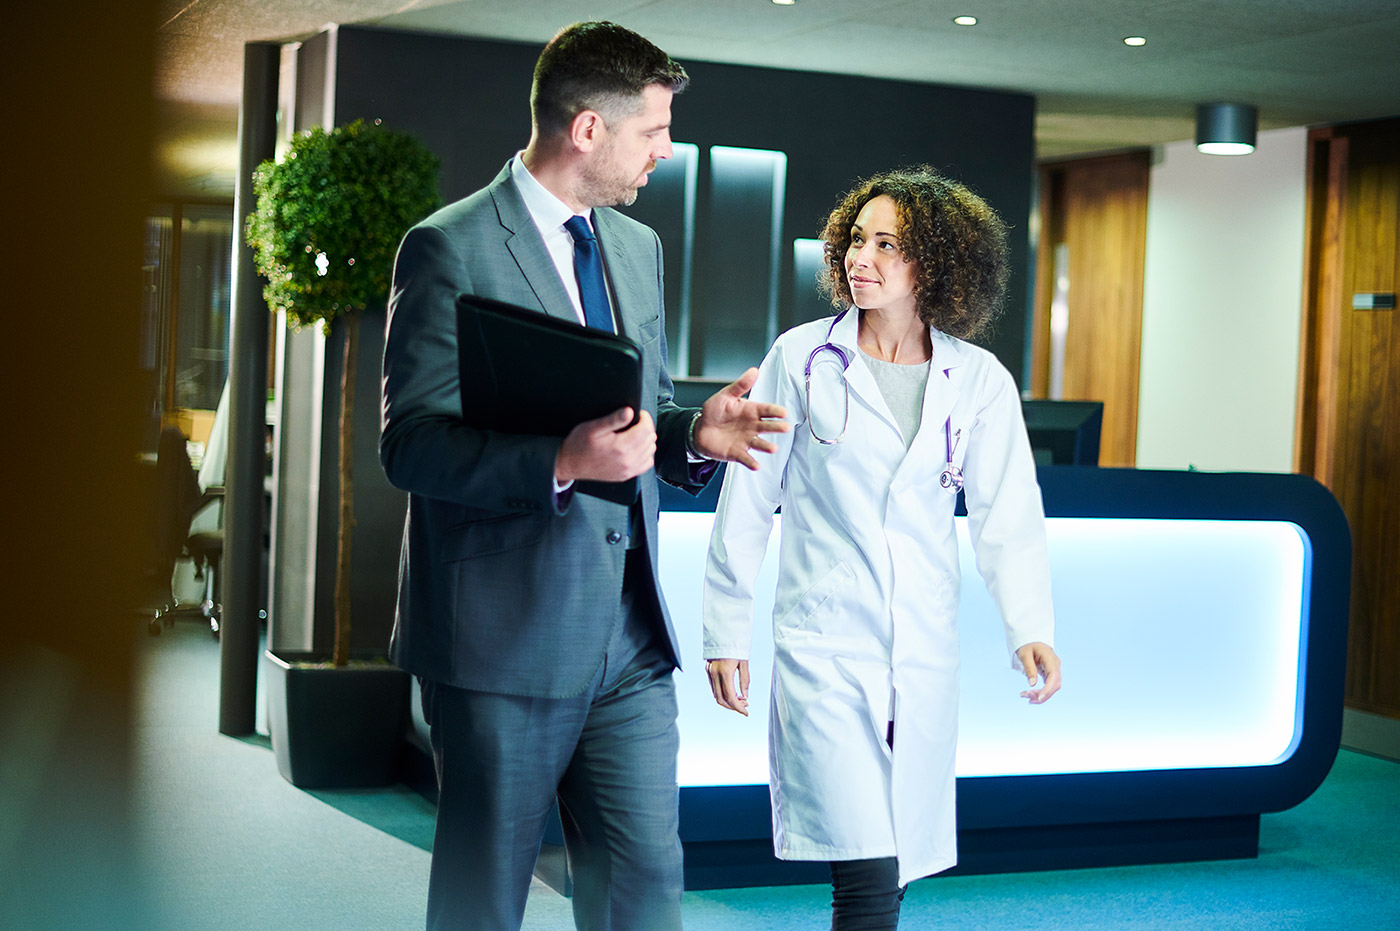 A female healthcare worker talking to a man in a suit.